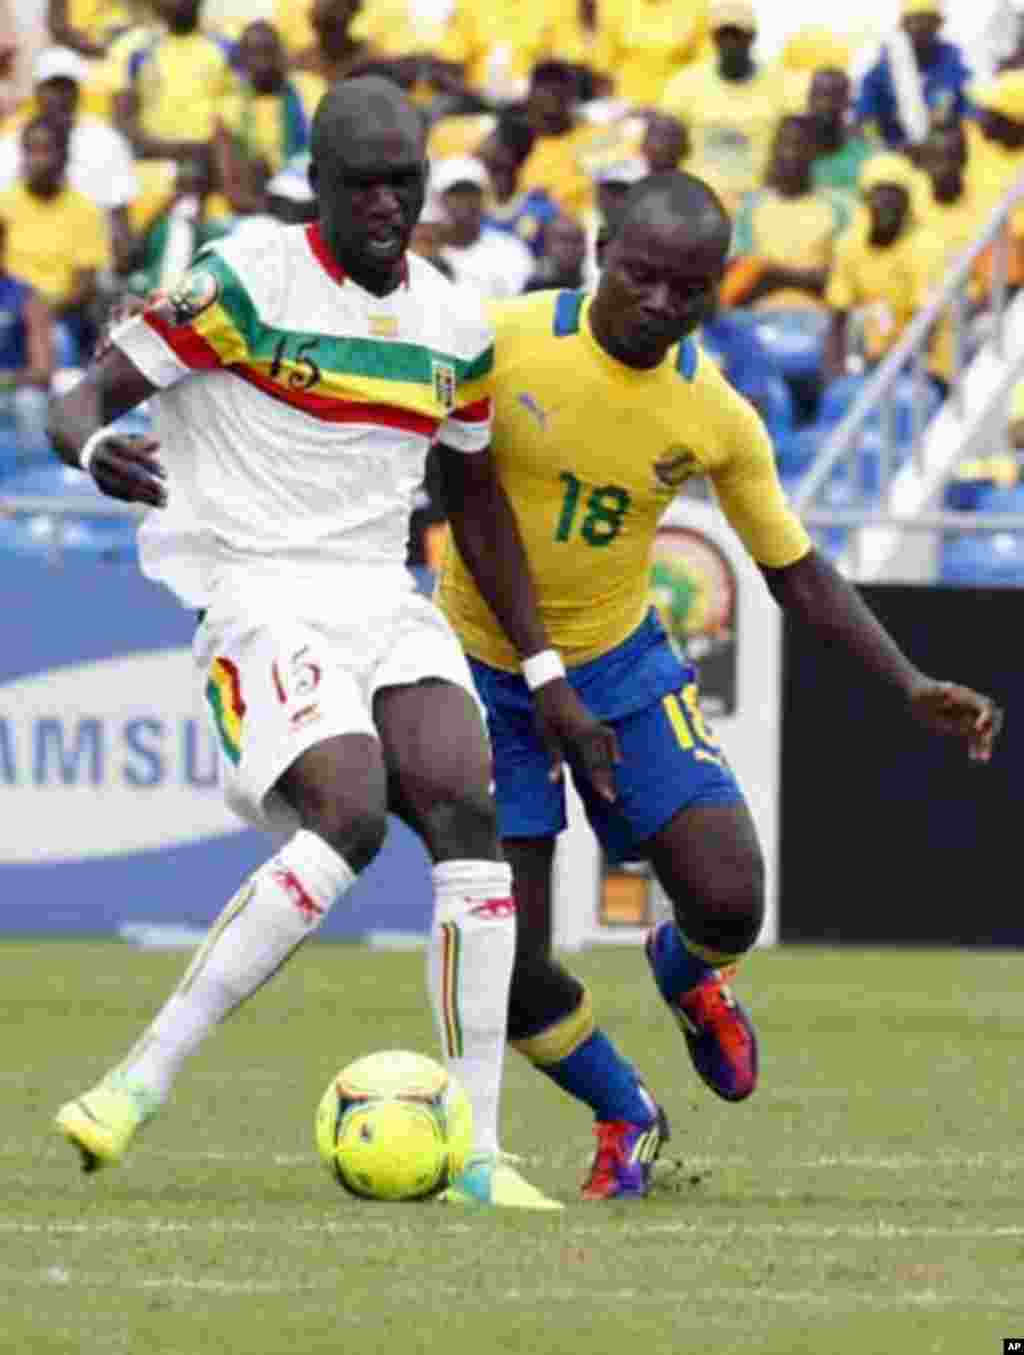 Mali's Bakaye Traore (L) fights for the ball with Gabon's Cedric Moubamba during their African Cup of Nations quarter-final soccer match at the Stade De L'Amitie Stadium in Gabon's capital Libreville, February 5, 2012.